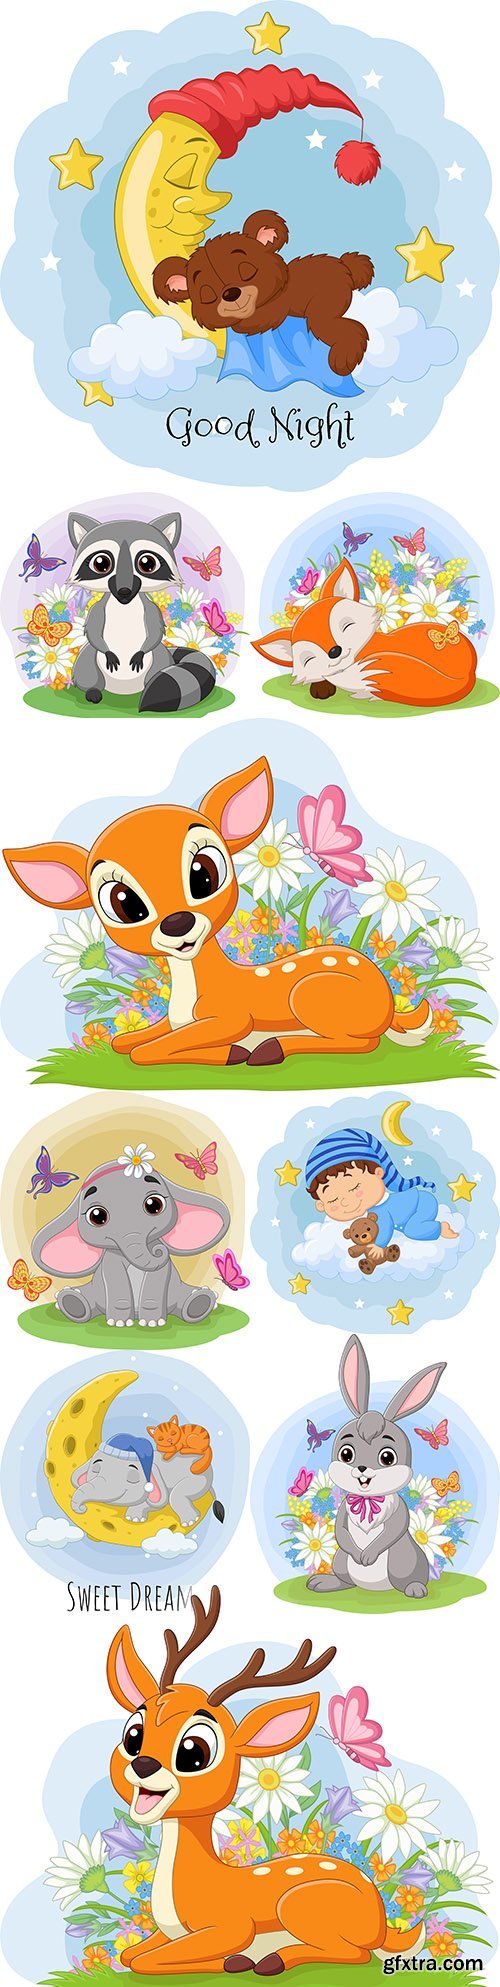 Cartoon animals with flowers and butterflies illustration